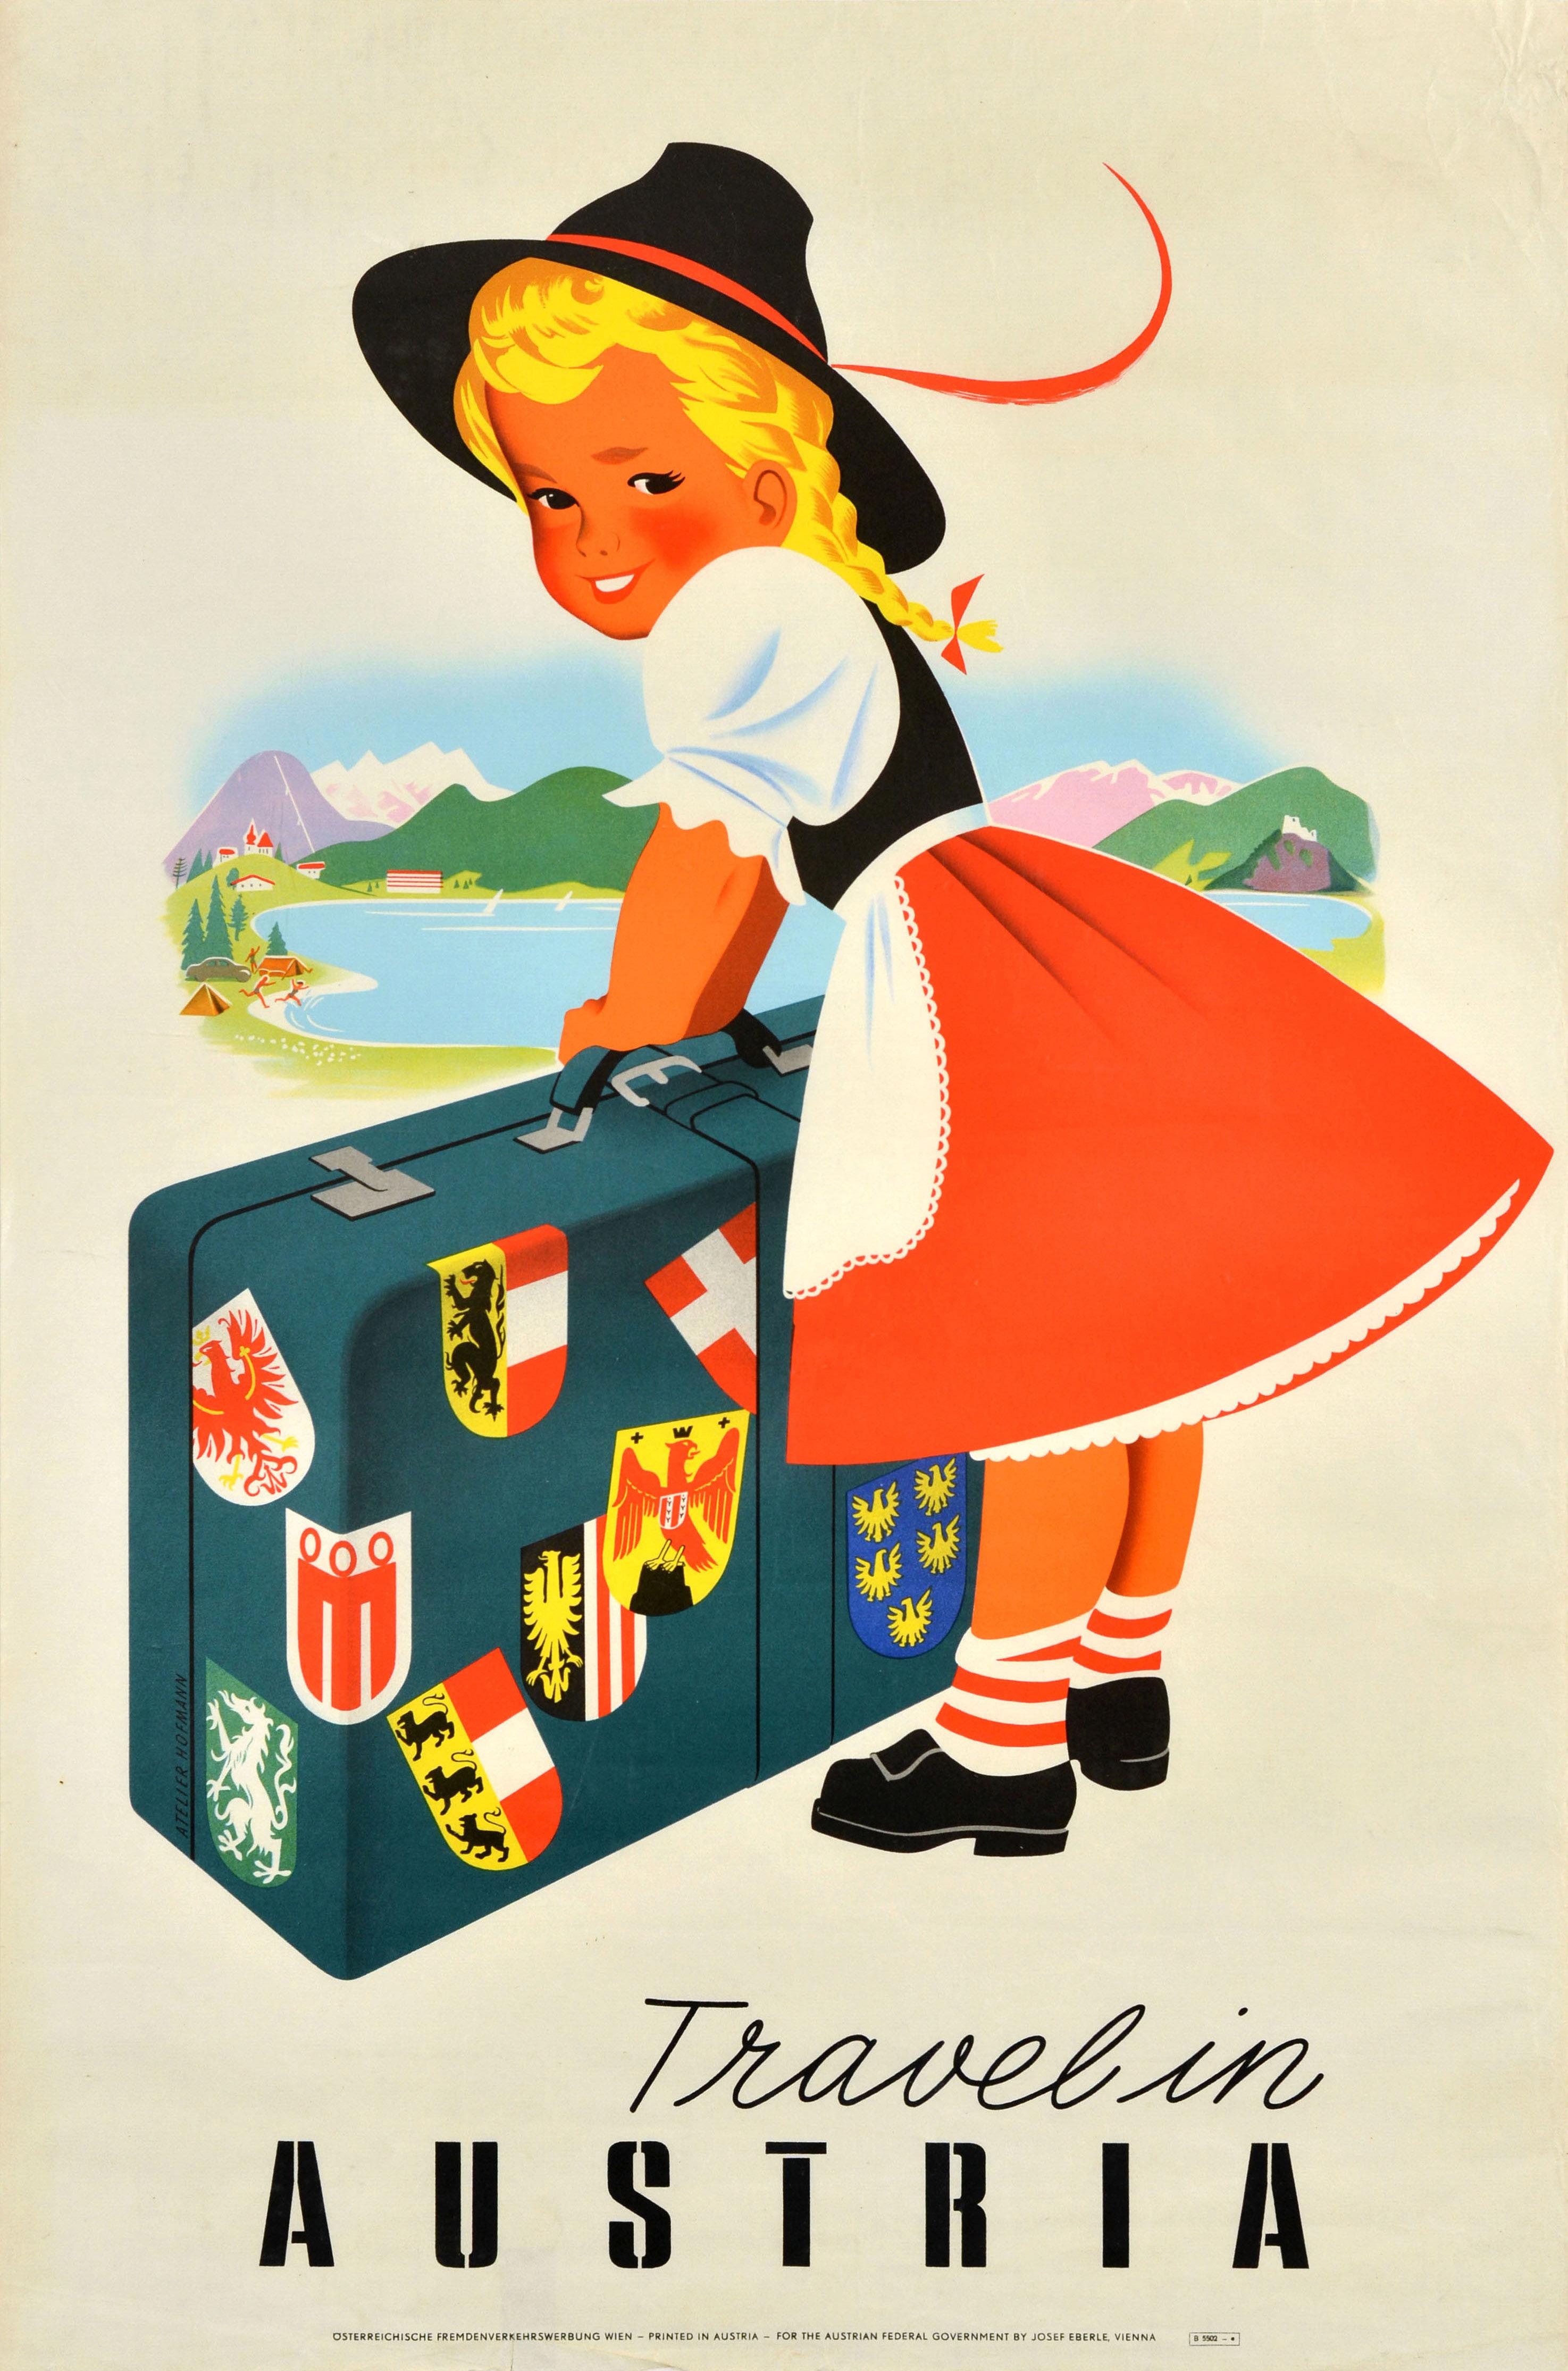 Original vintage travel poster - Travel in Austria - featuring an image of a smiling girl in a traditional dress and hat holding a large suitcase covered in luggage labels showing the various coat of arms of various Austrian states with a scenic